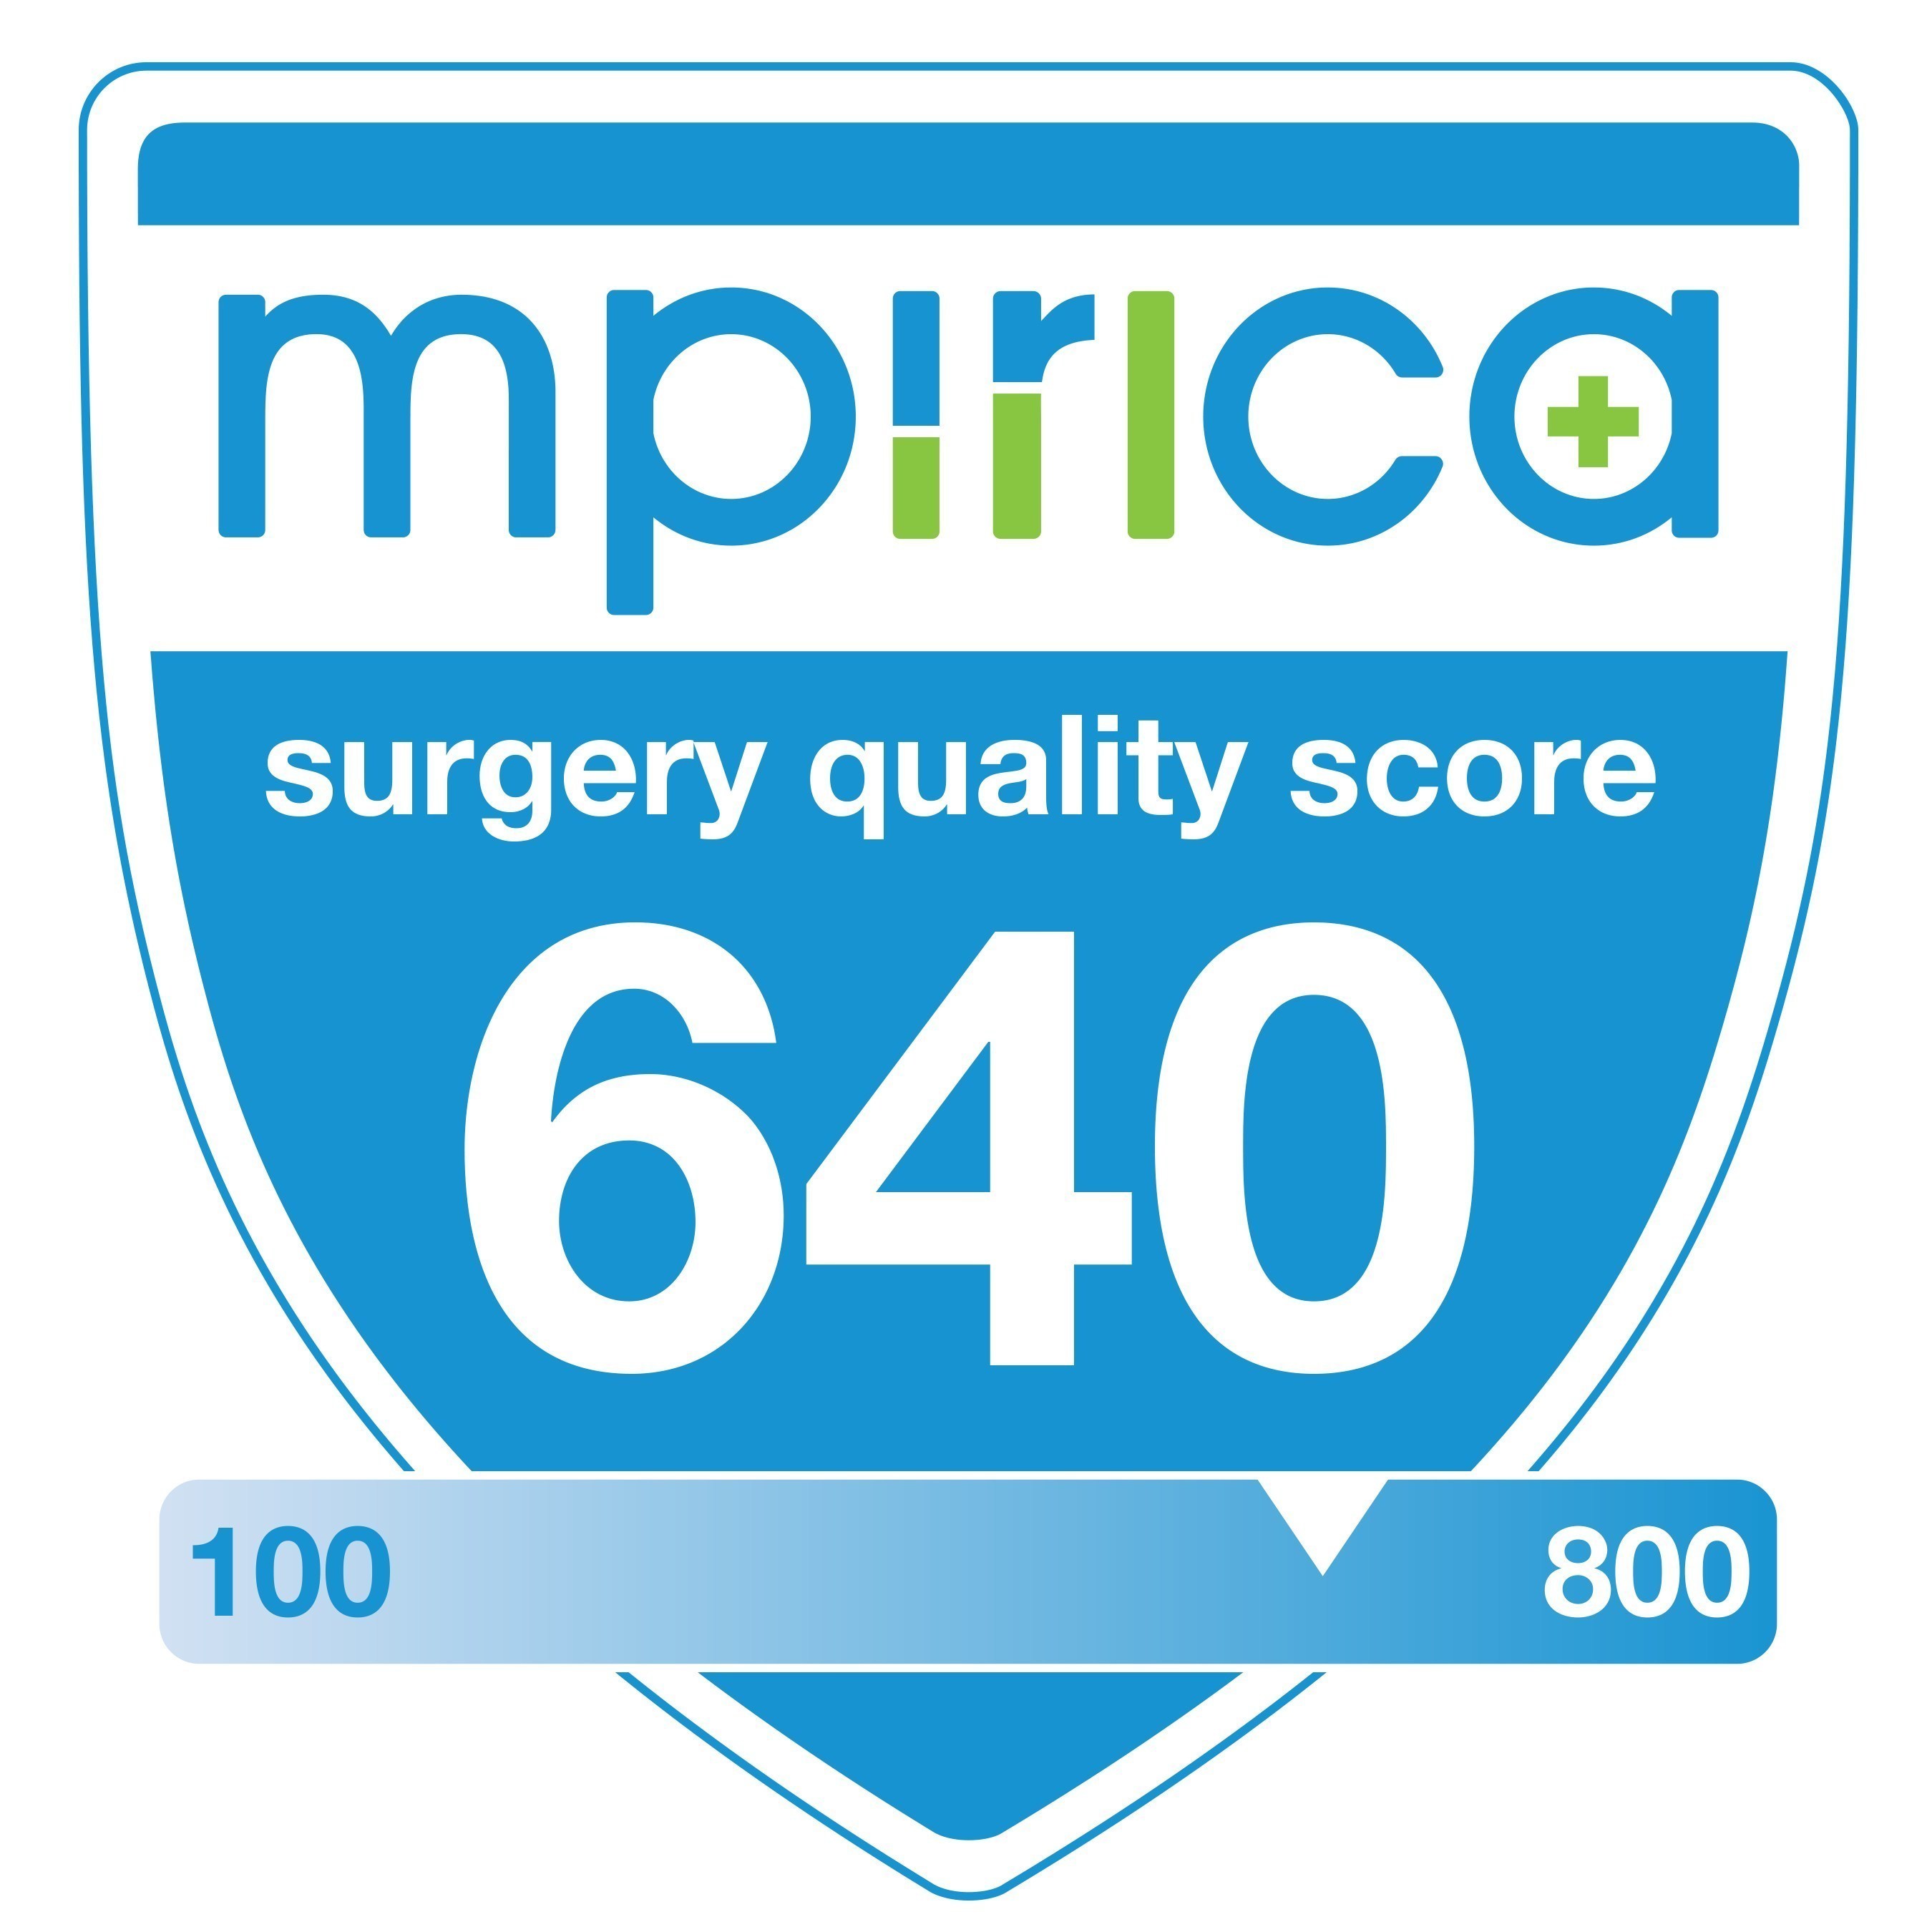 MPIRICA Quality Score measures surgery clinical outcomes to help patients make informed decisions. It was created to help demystify healthcare quality transparency for consumers at the procedure level, and is based on past performance of hospitals and surgeons throughout the U.S.